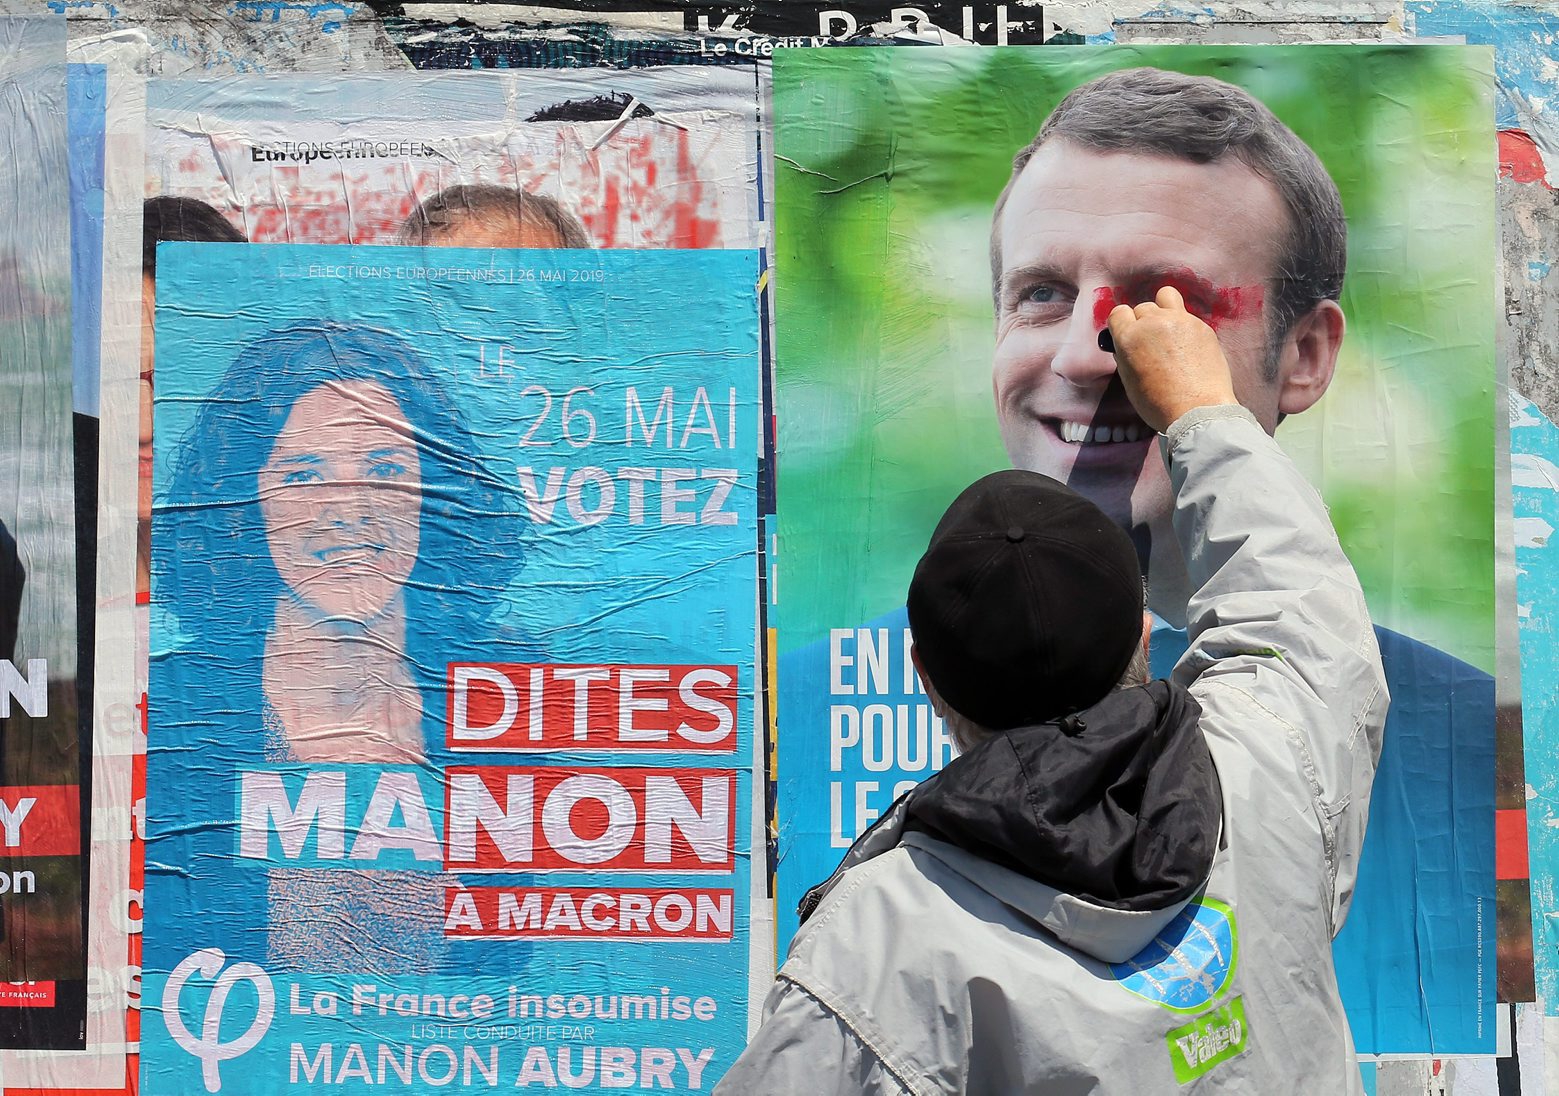 FILE - In this Tuesday, May 21, 2019 file photo, a supporter of French candidate for La France Insoumise party Marion Aubry, scribbles on a campaign poster of French president Emmanuel Macron in Saint-Jean-de-Luz, southwestern France. The European Parliament elections have never been so hotly anticipated or contested, with many predicting that this yearÄôs ballot will mark a coming-of-age moment for the euroskeptic far-right movement. The elections start Thursday May 23, 2019 and run through Sunday May 26 and are taking place in all of the European UnionÄôs 28 nations. (AP Photo/Bob Edme, File) European Elections What's At Stake